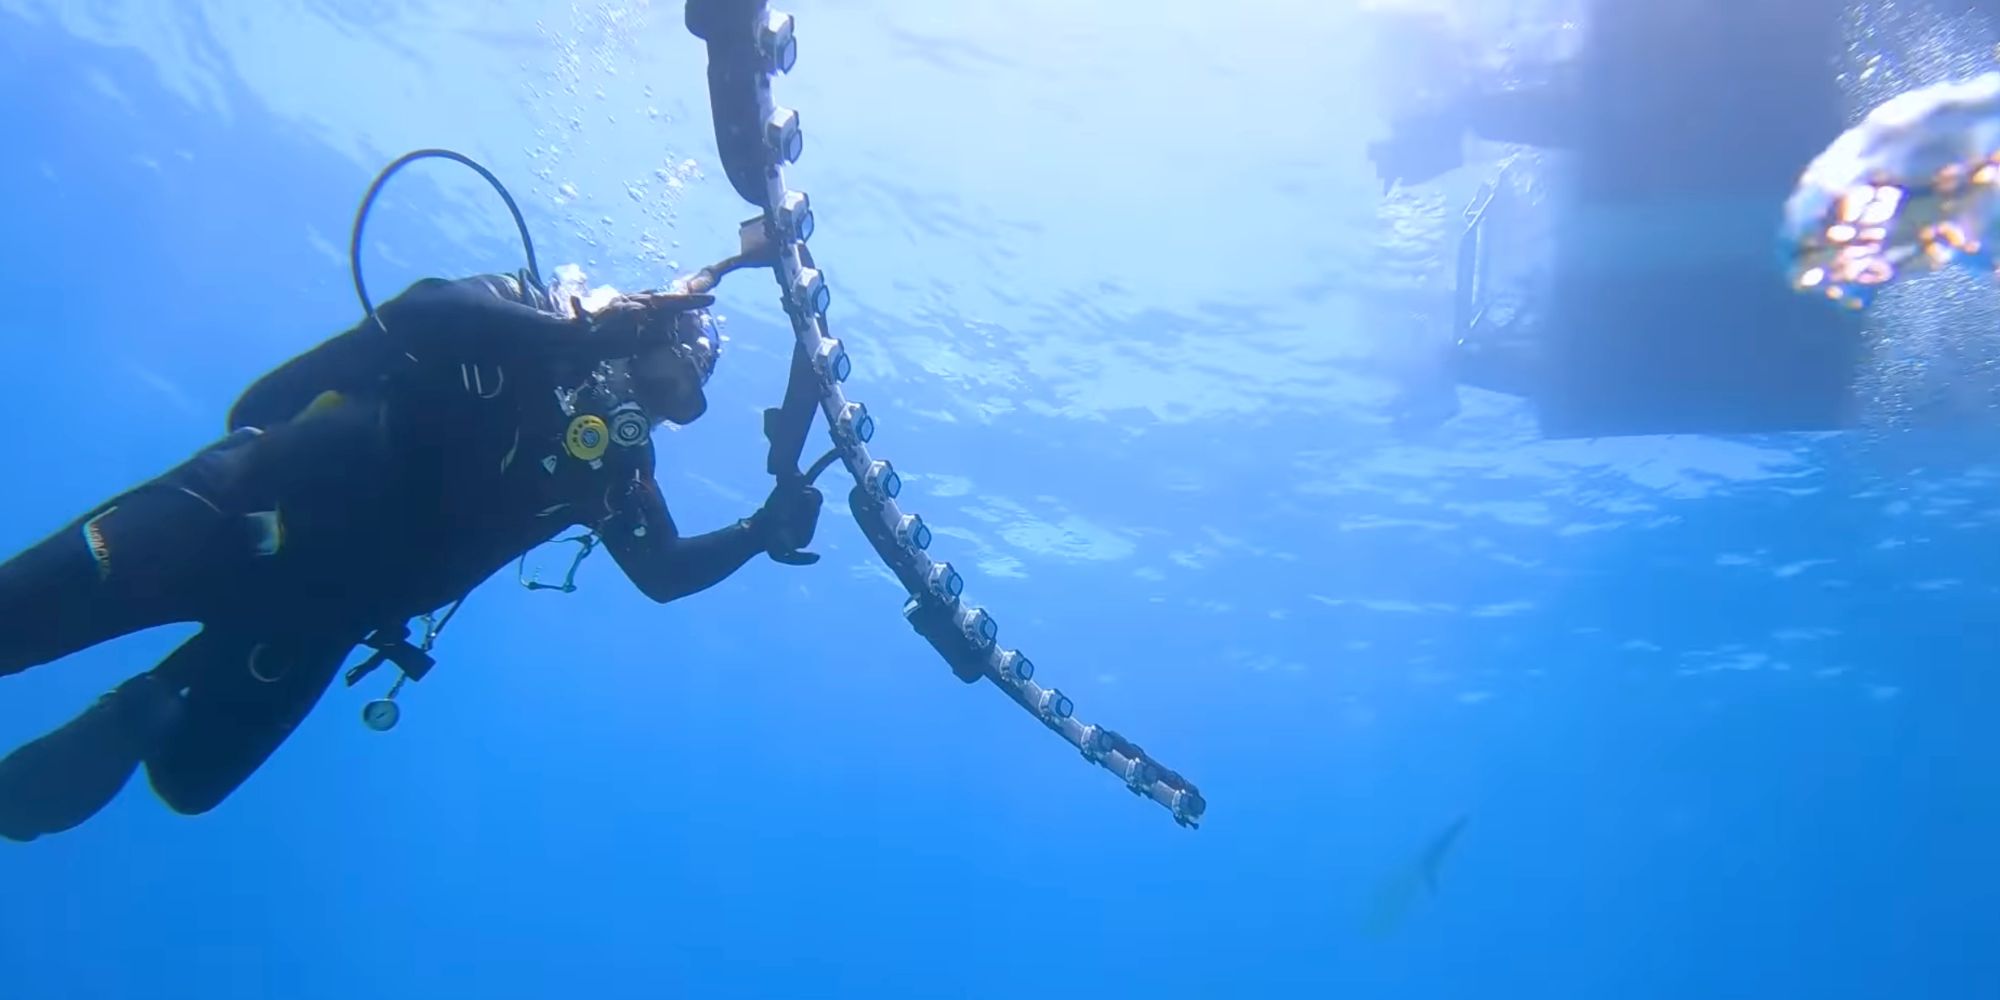 This Incredible Shark Footage Made Possible By Rig Of 21 GoPros